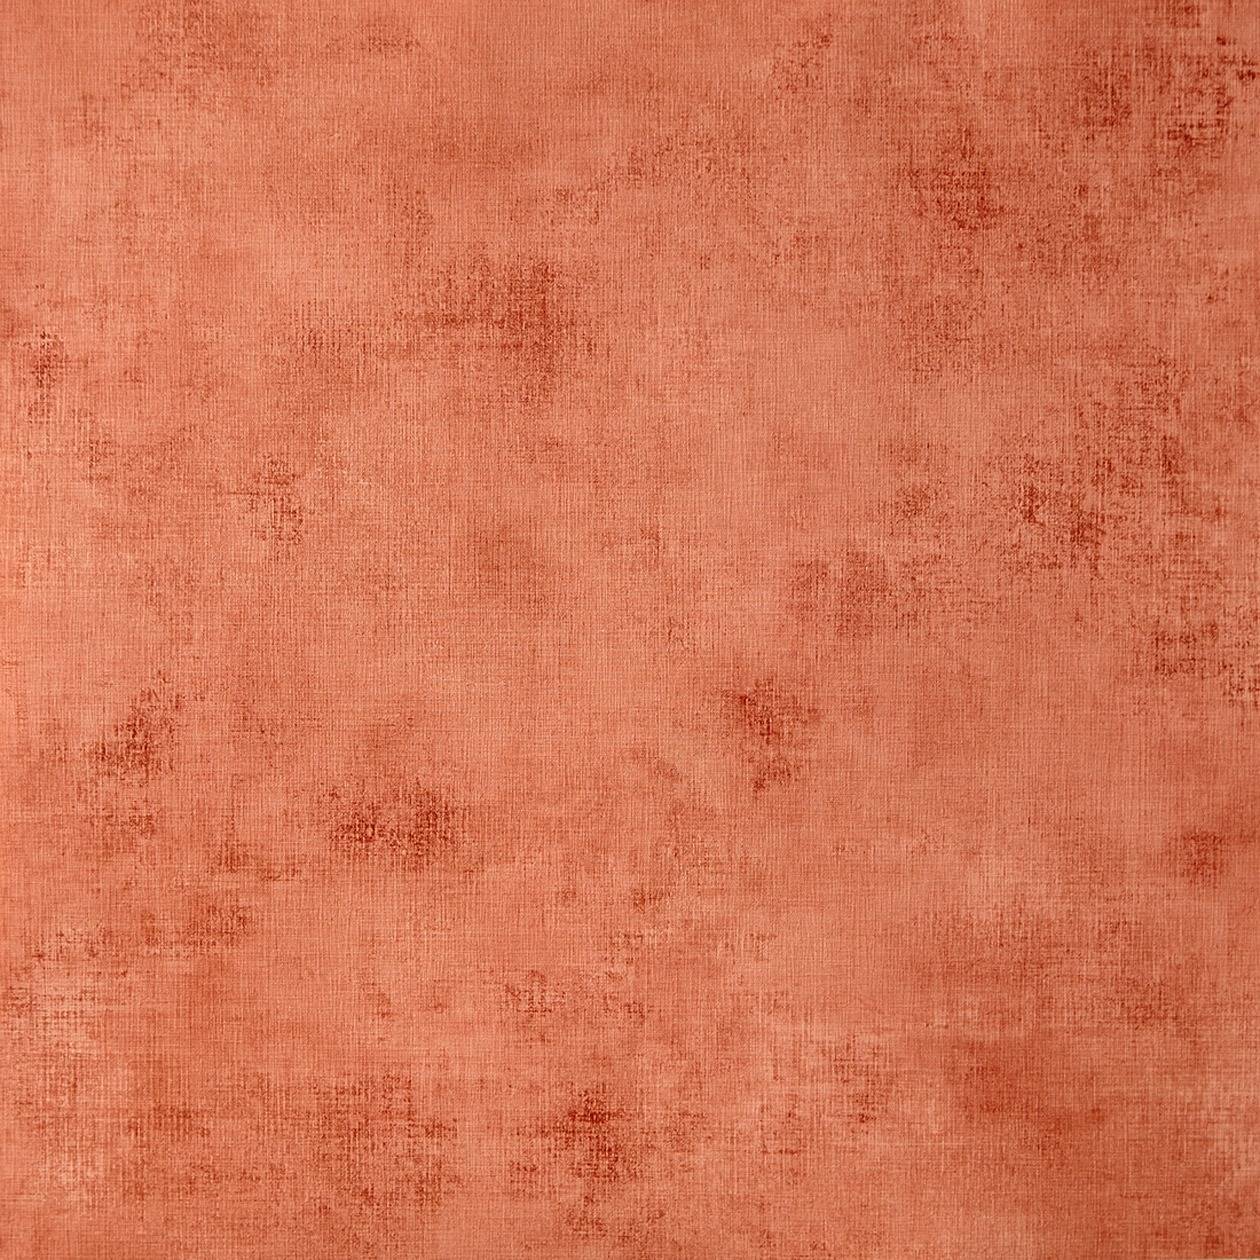 A red colored background with no texture - Terracotta